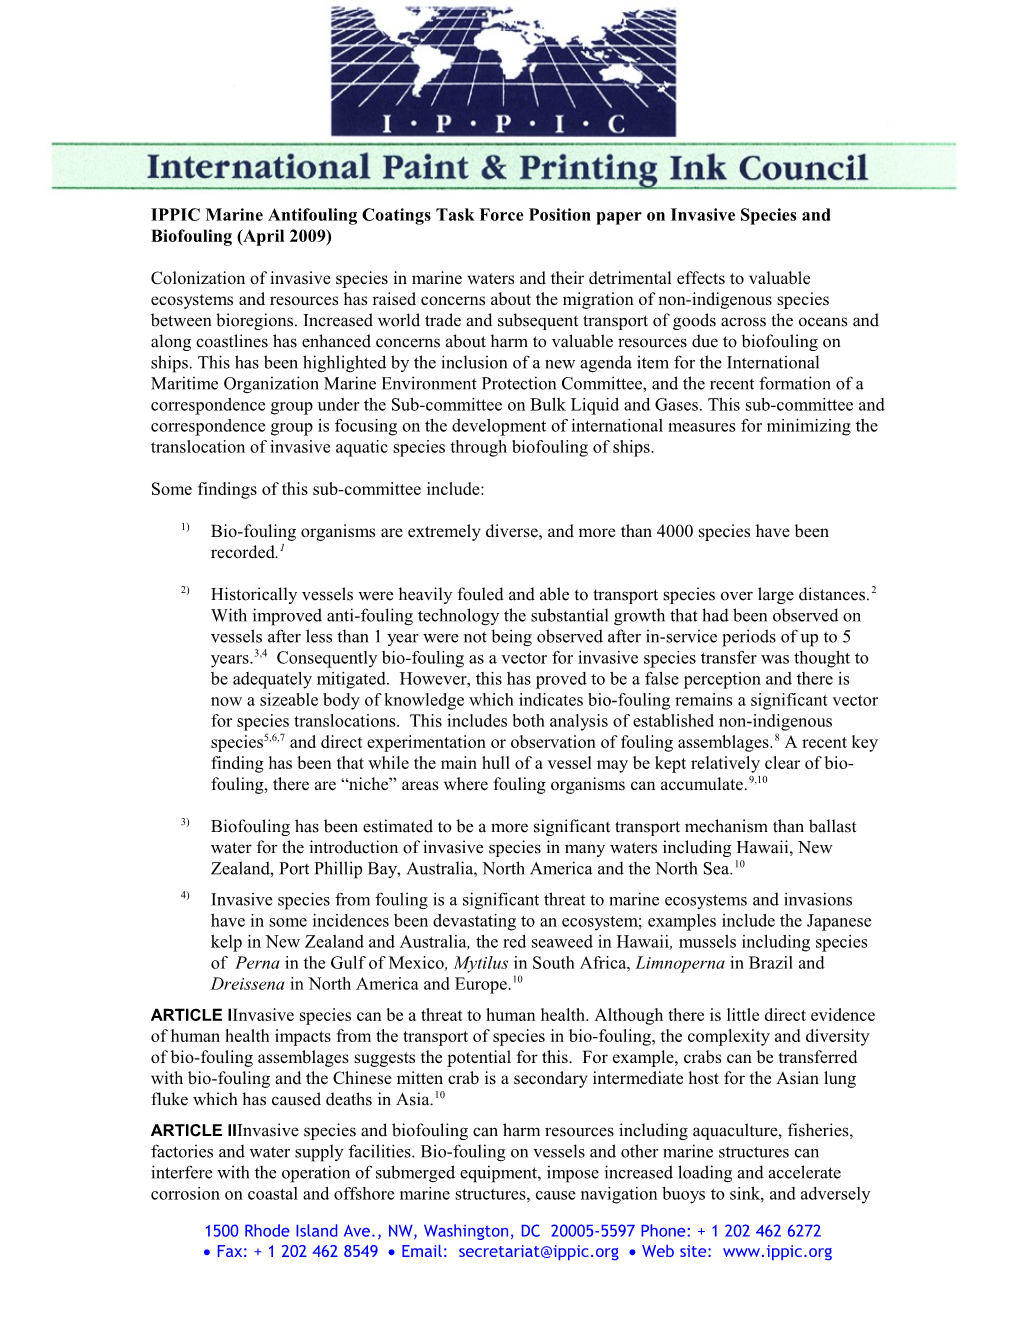 IPPIC Marine Antifouling Coatings Task Force Position Paper on Invasive Species and Biofouling